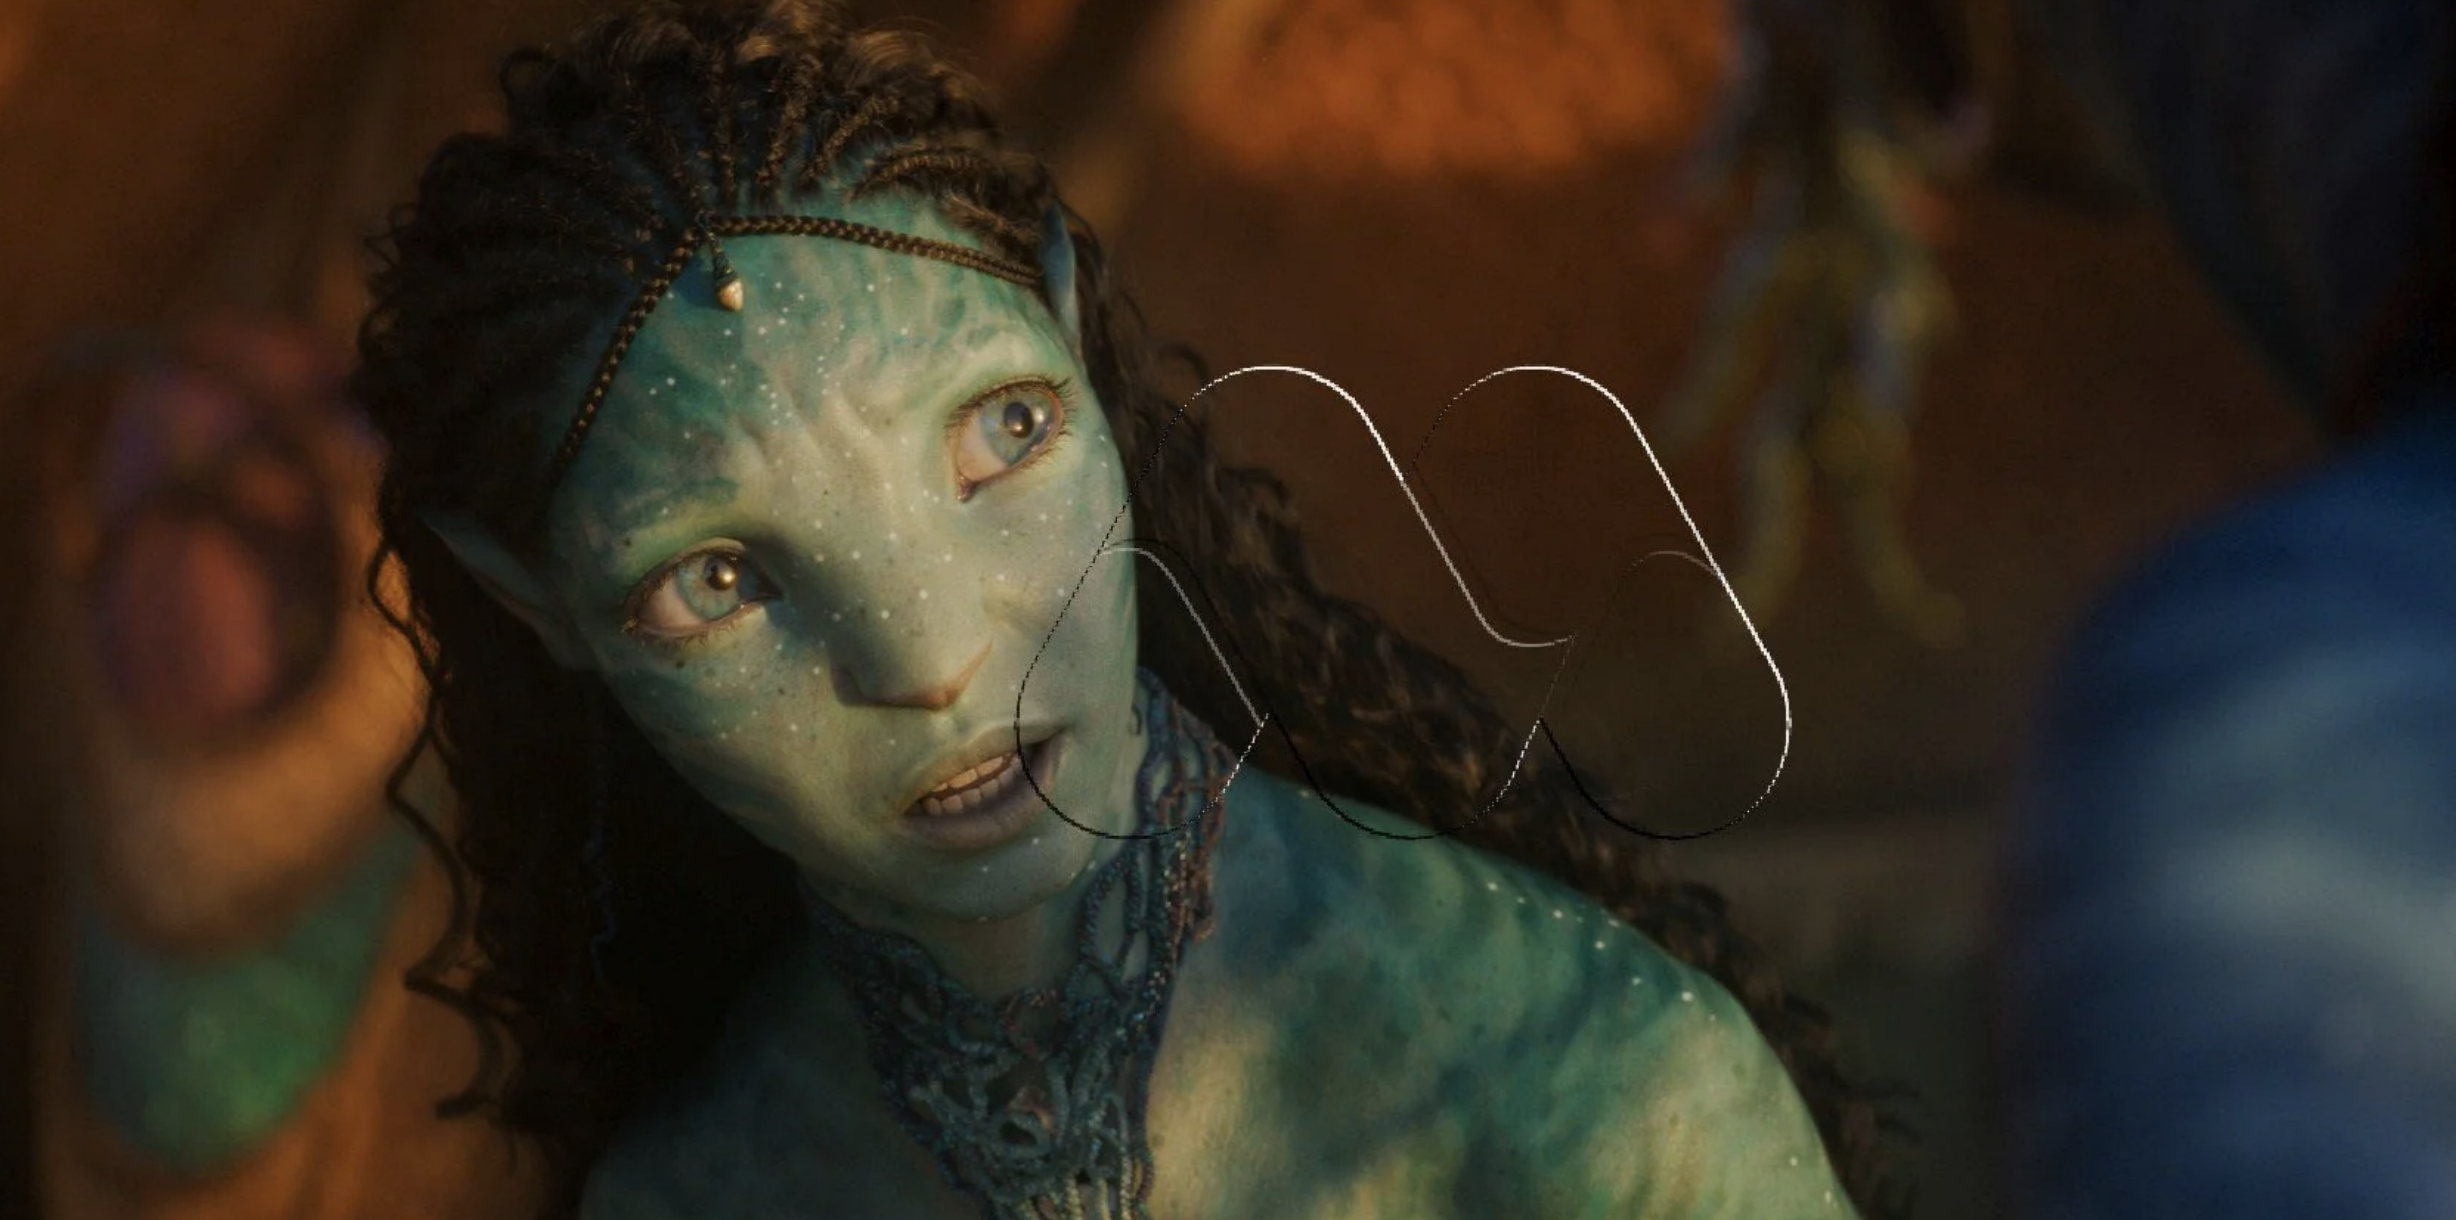 RUMOR: A Nine-Hour Long Cut Of ‘Avatar 3’ Exists